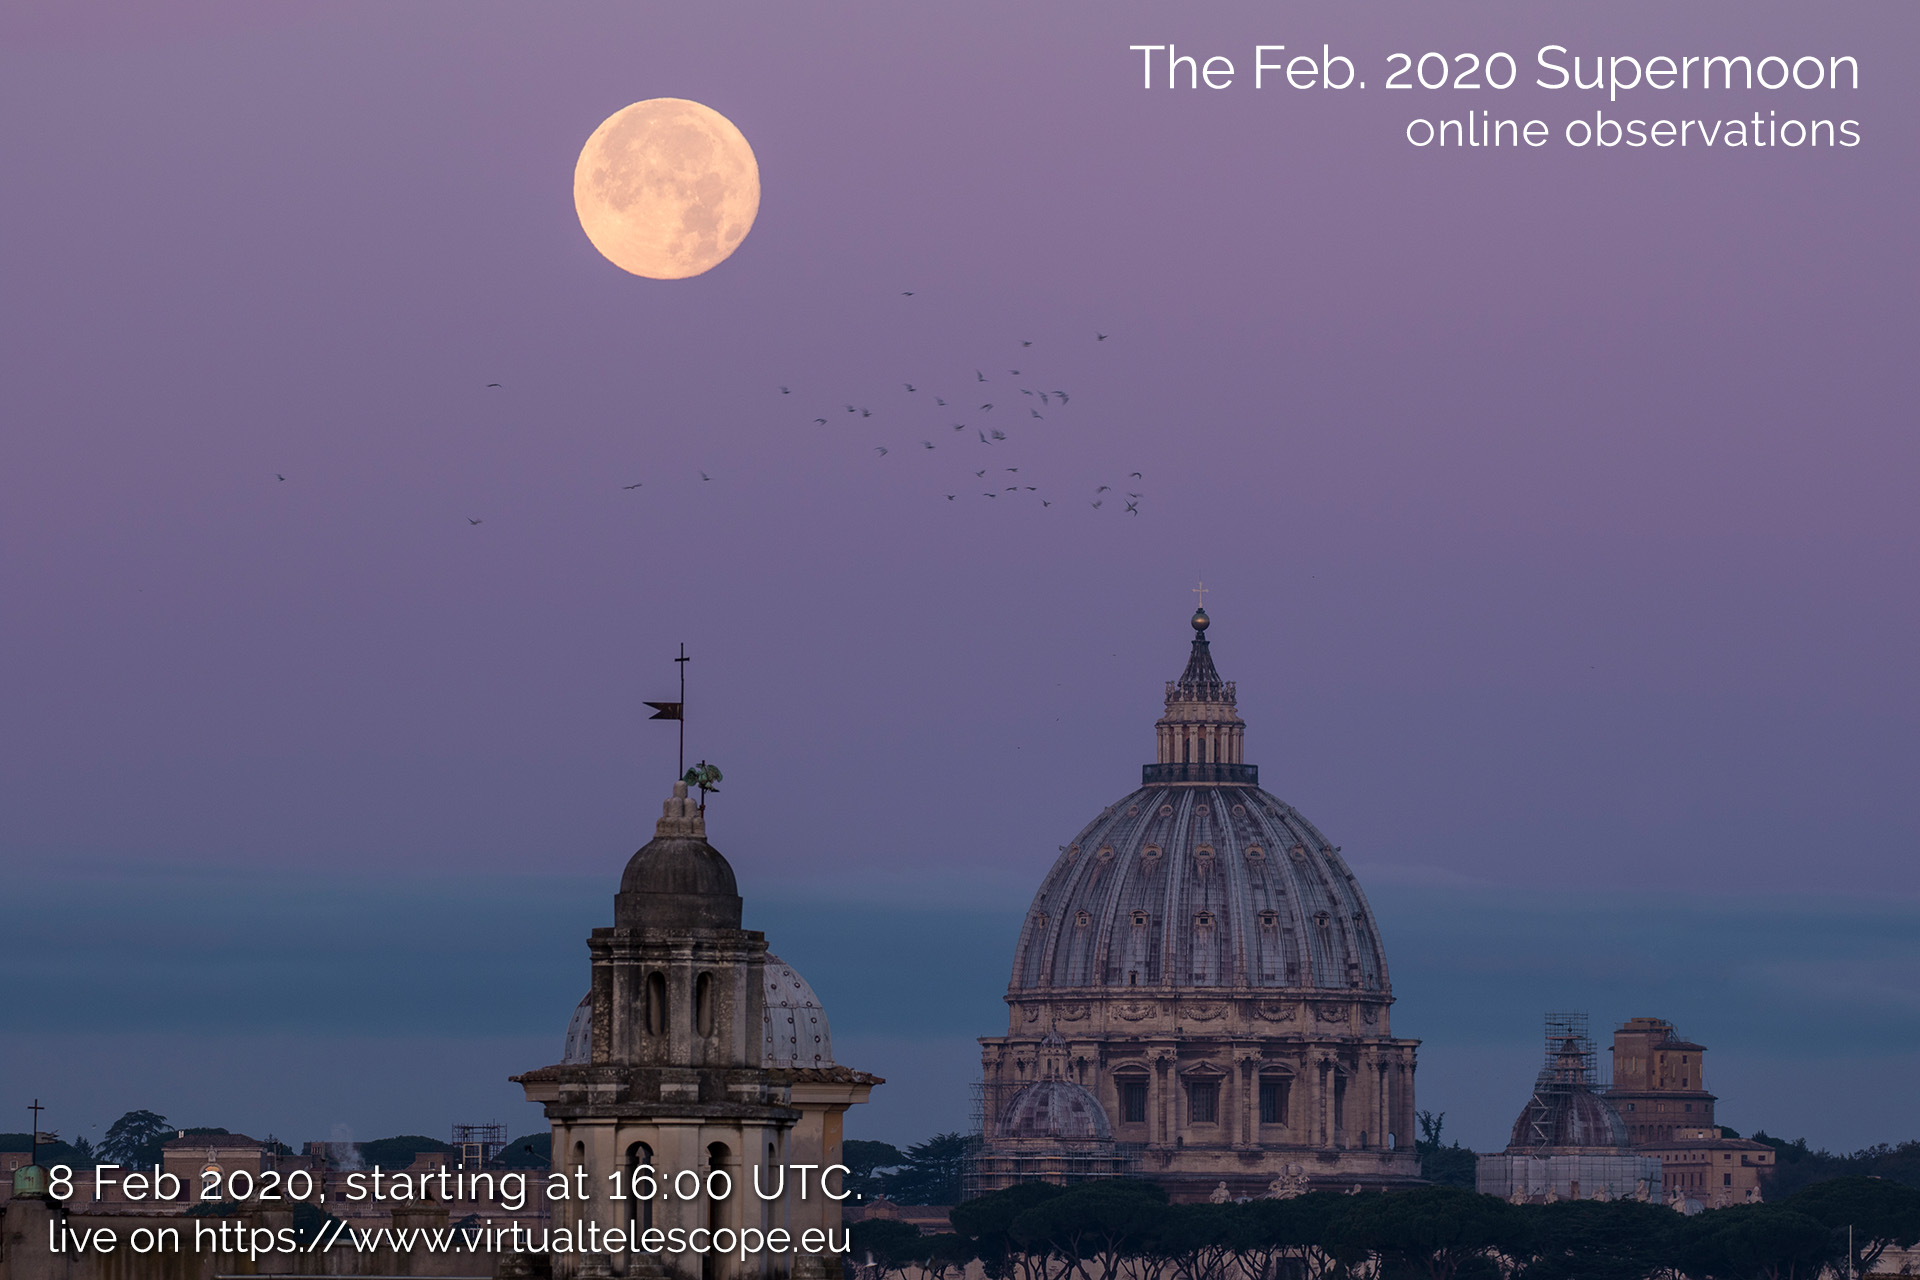 Feb. 2020 Supermoon: poster of the event